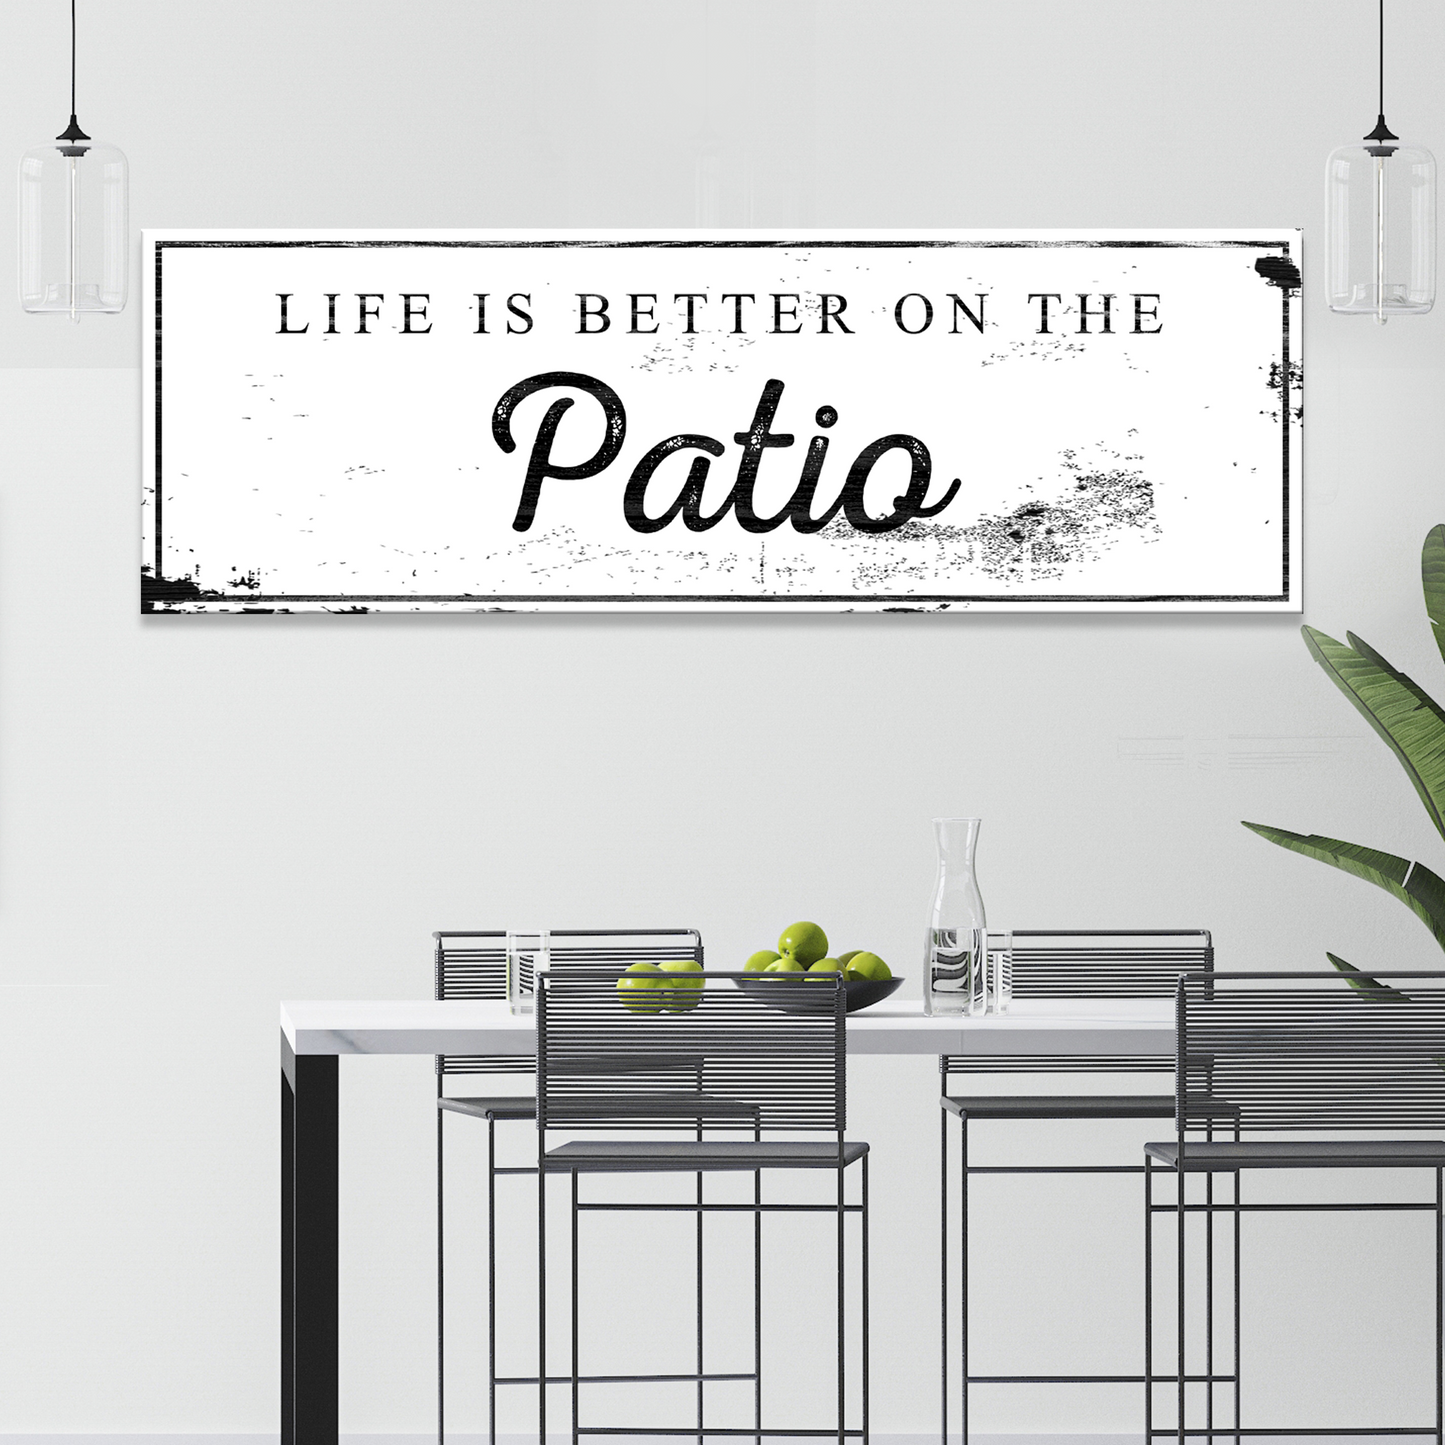 Life is Better on the Patio Sign - Image by Tailored Canvases